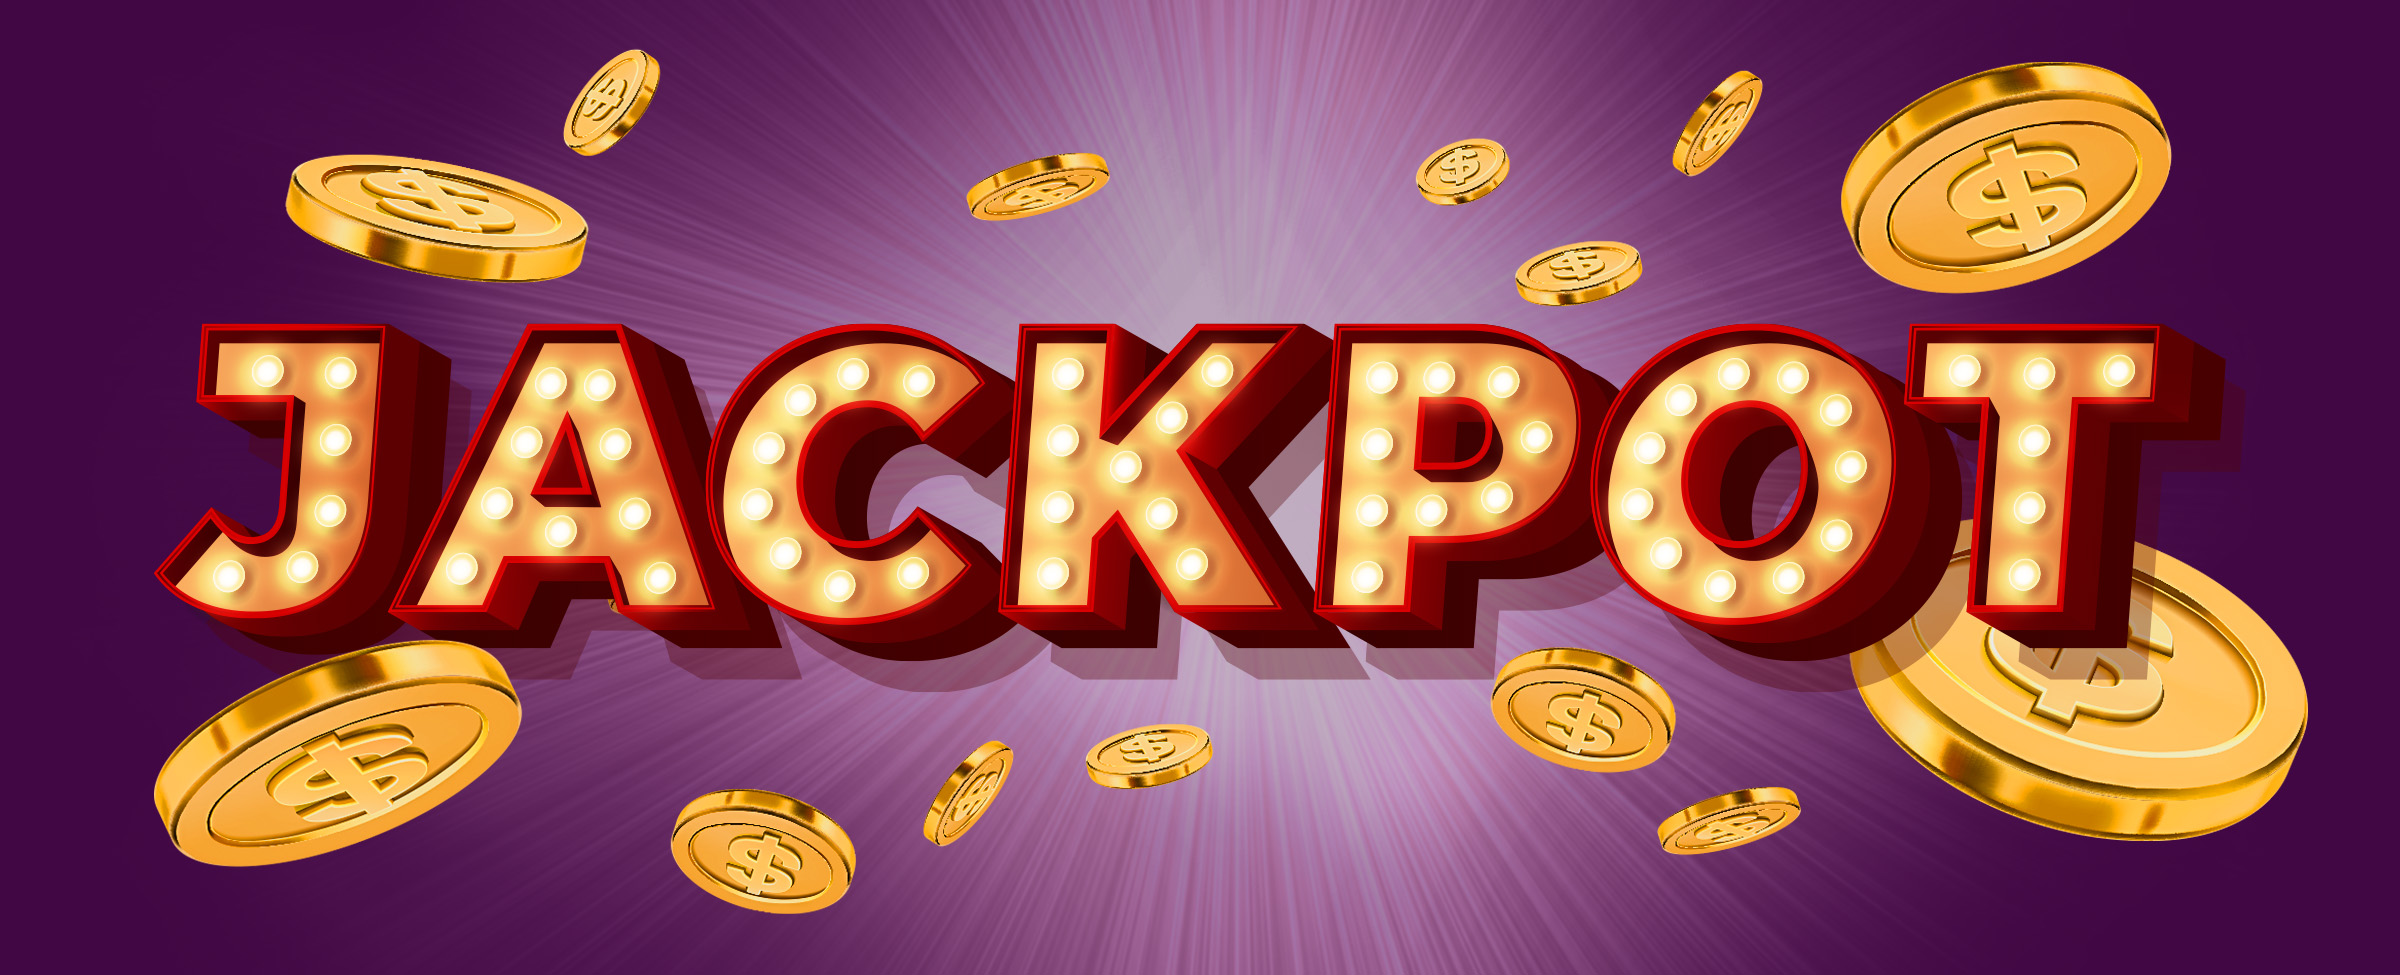 A large 3D in Vegas-style font saying Jackpot appears in front of gold coins moving through the air on a purple background with a beam of light coming from behind